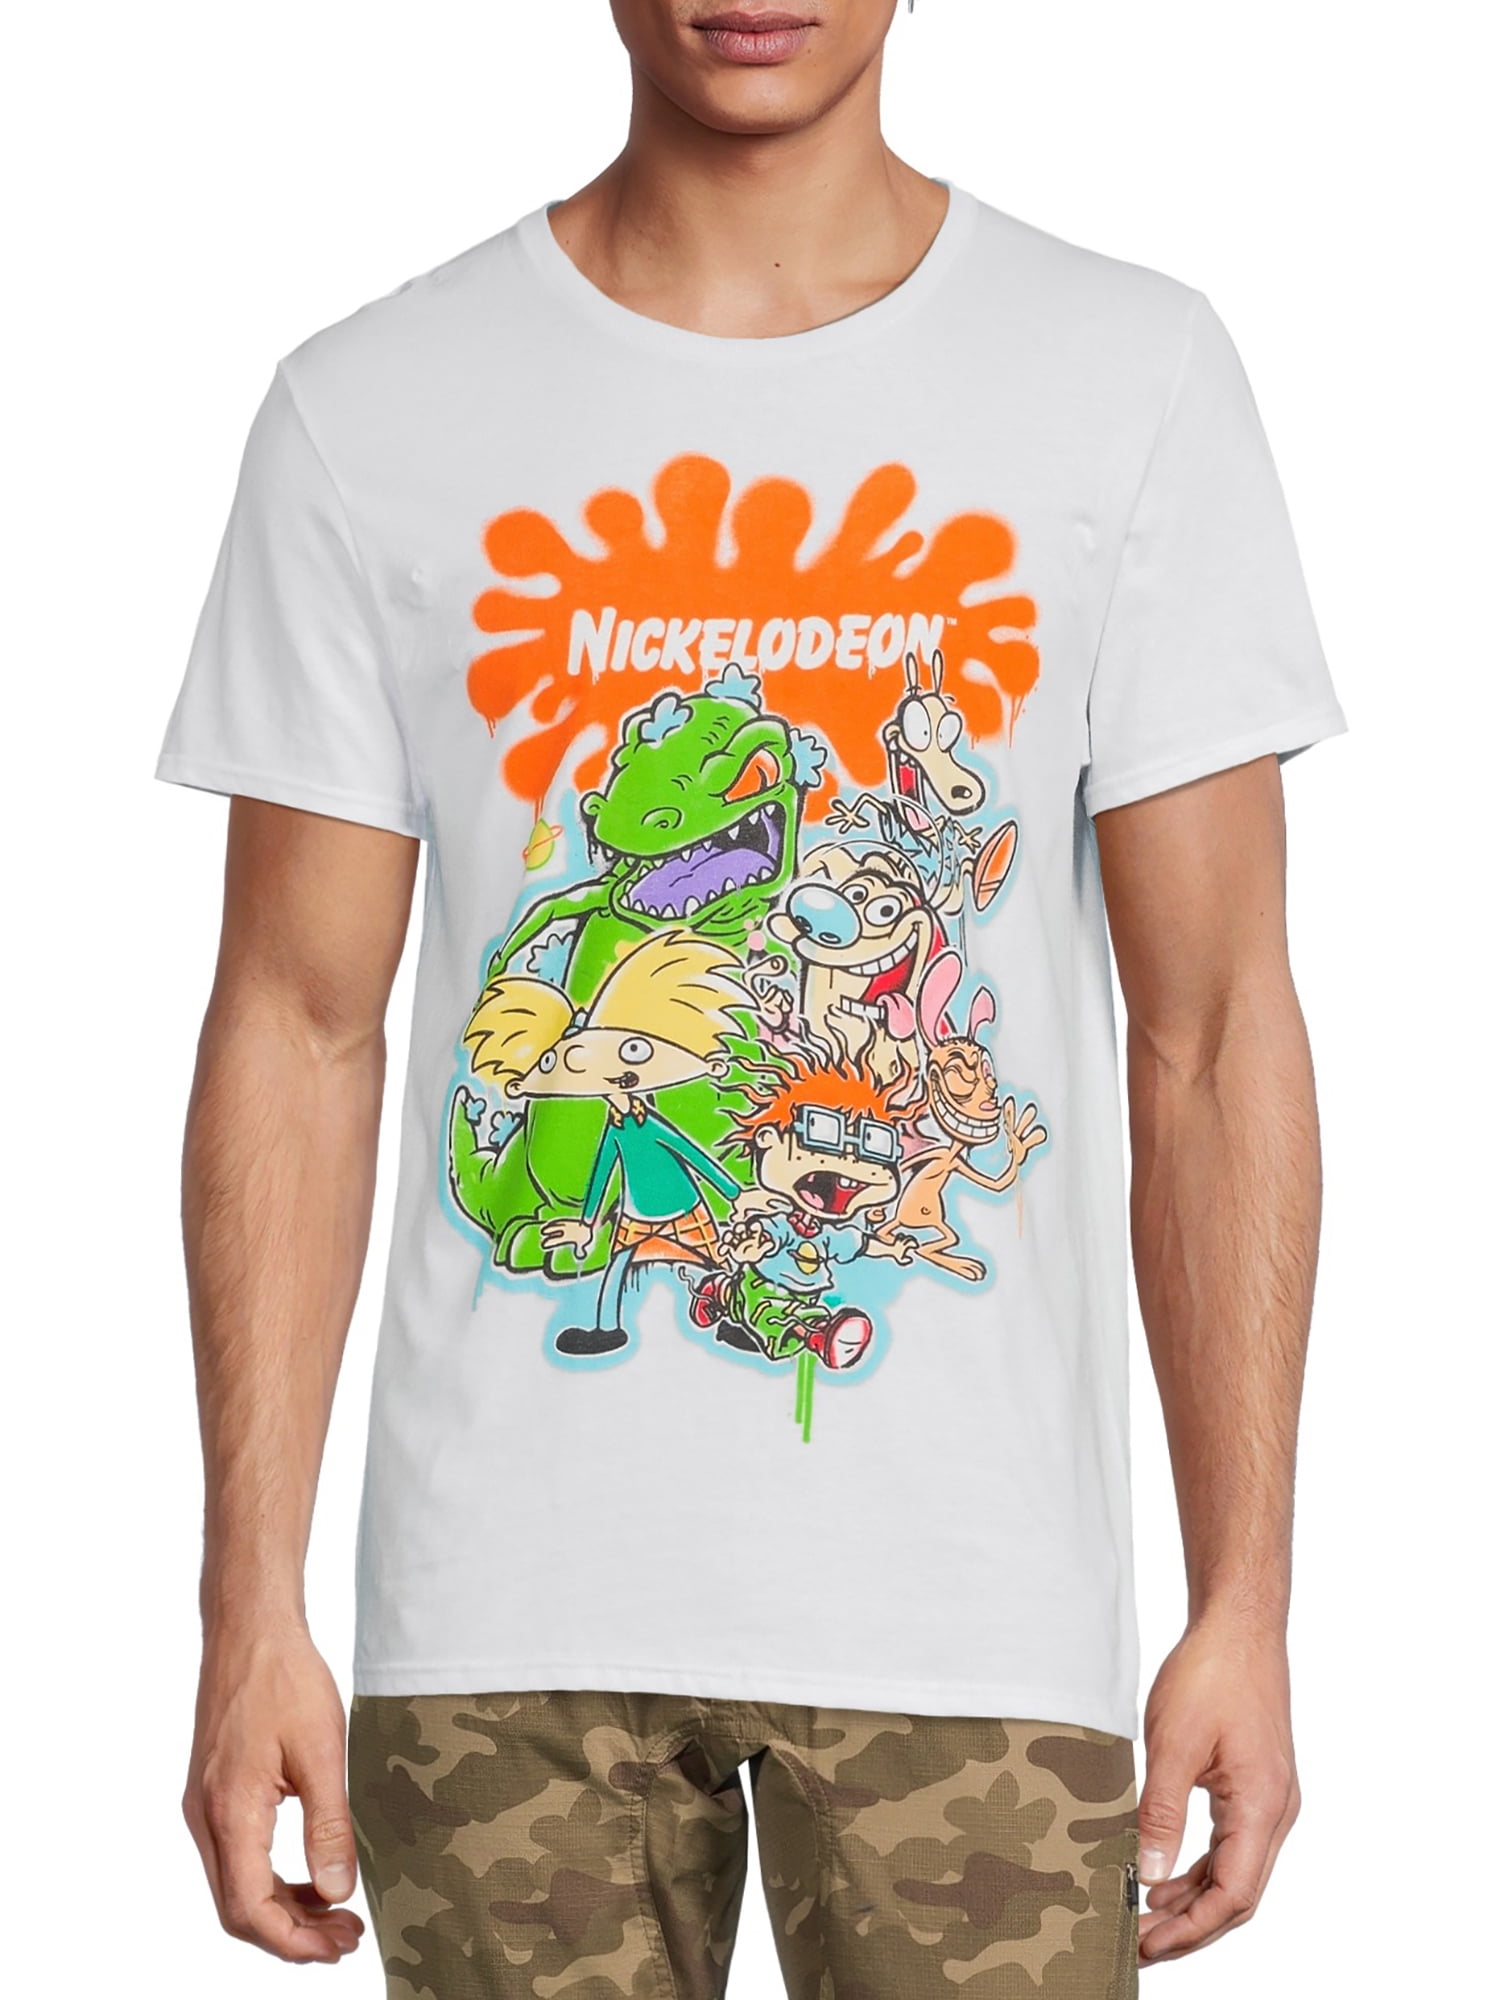 Nickelodeon Men's & Big Men's Group Graphic T-Shirt with Short Sleeves ...